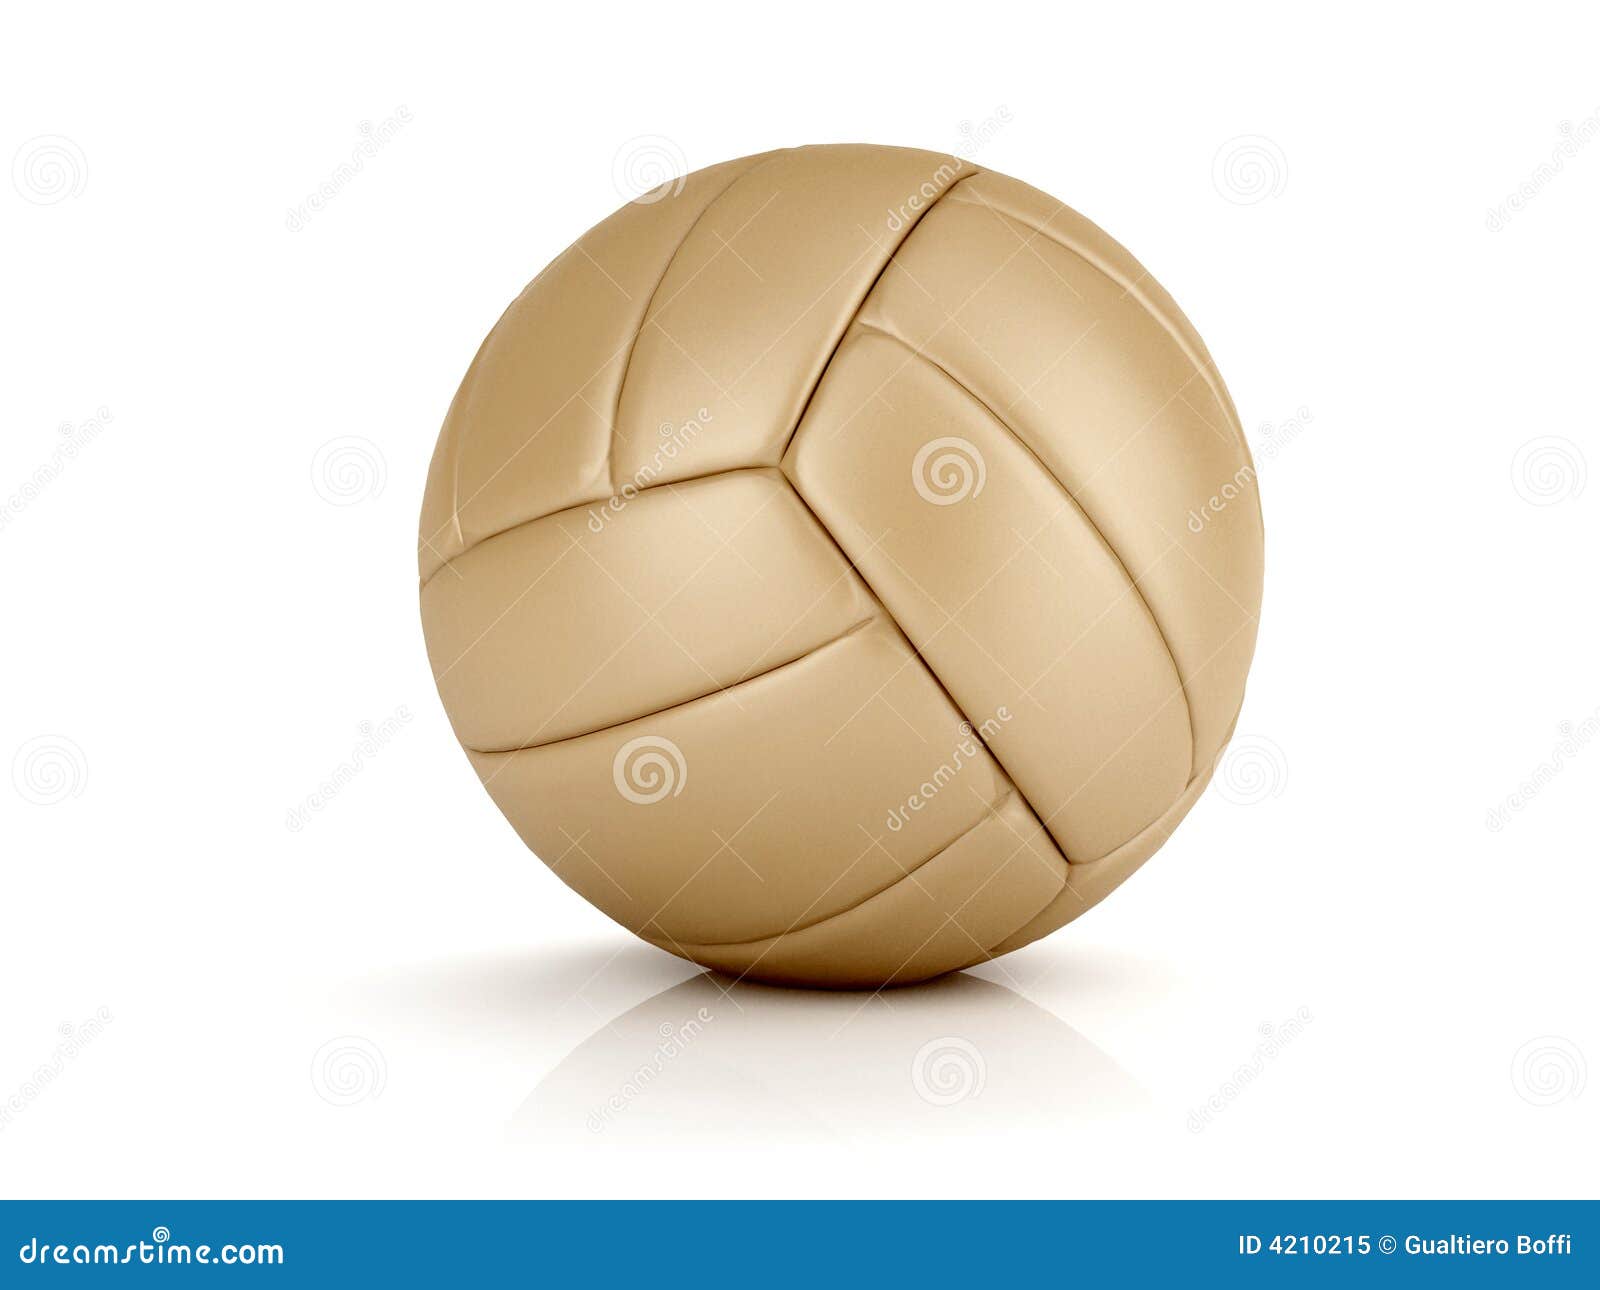 Classic volley ball stock image. Image of leather, volley - 4210215